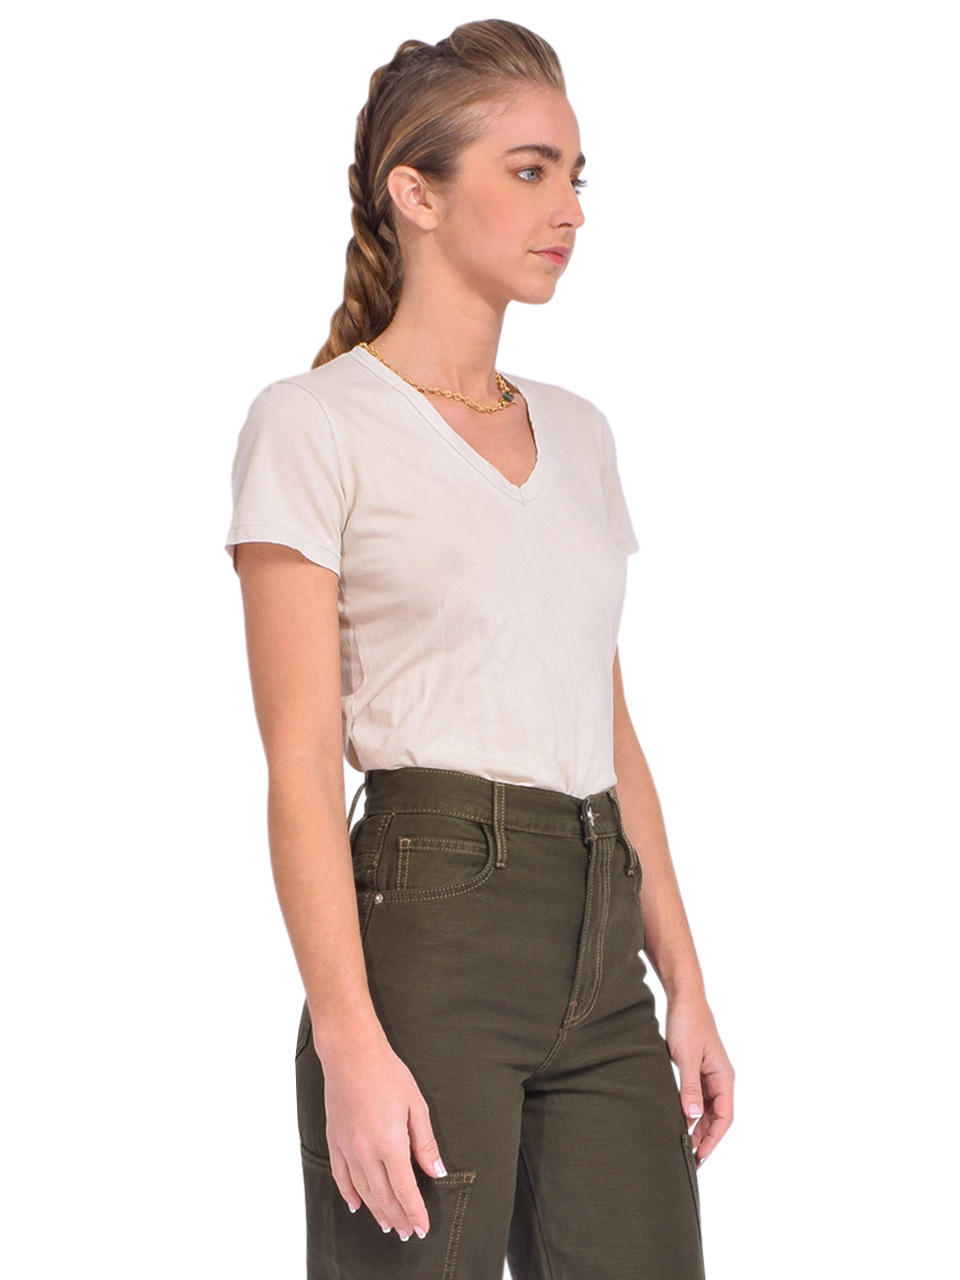 Cotton Citizen Standard V-Neck in Vintage Oatmeal Side View 

